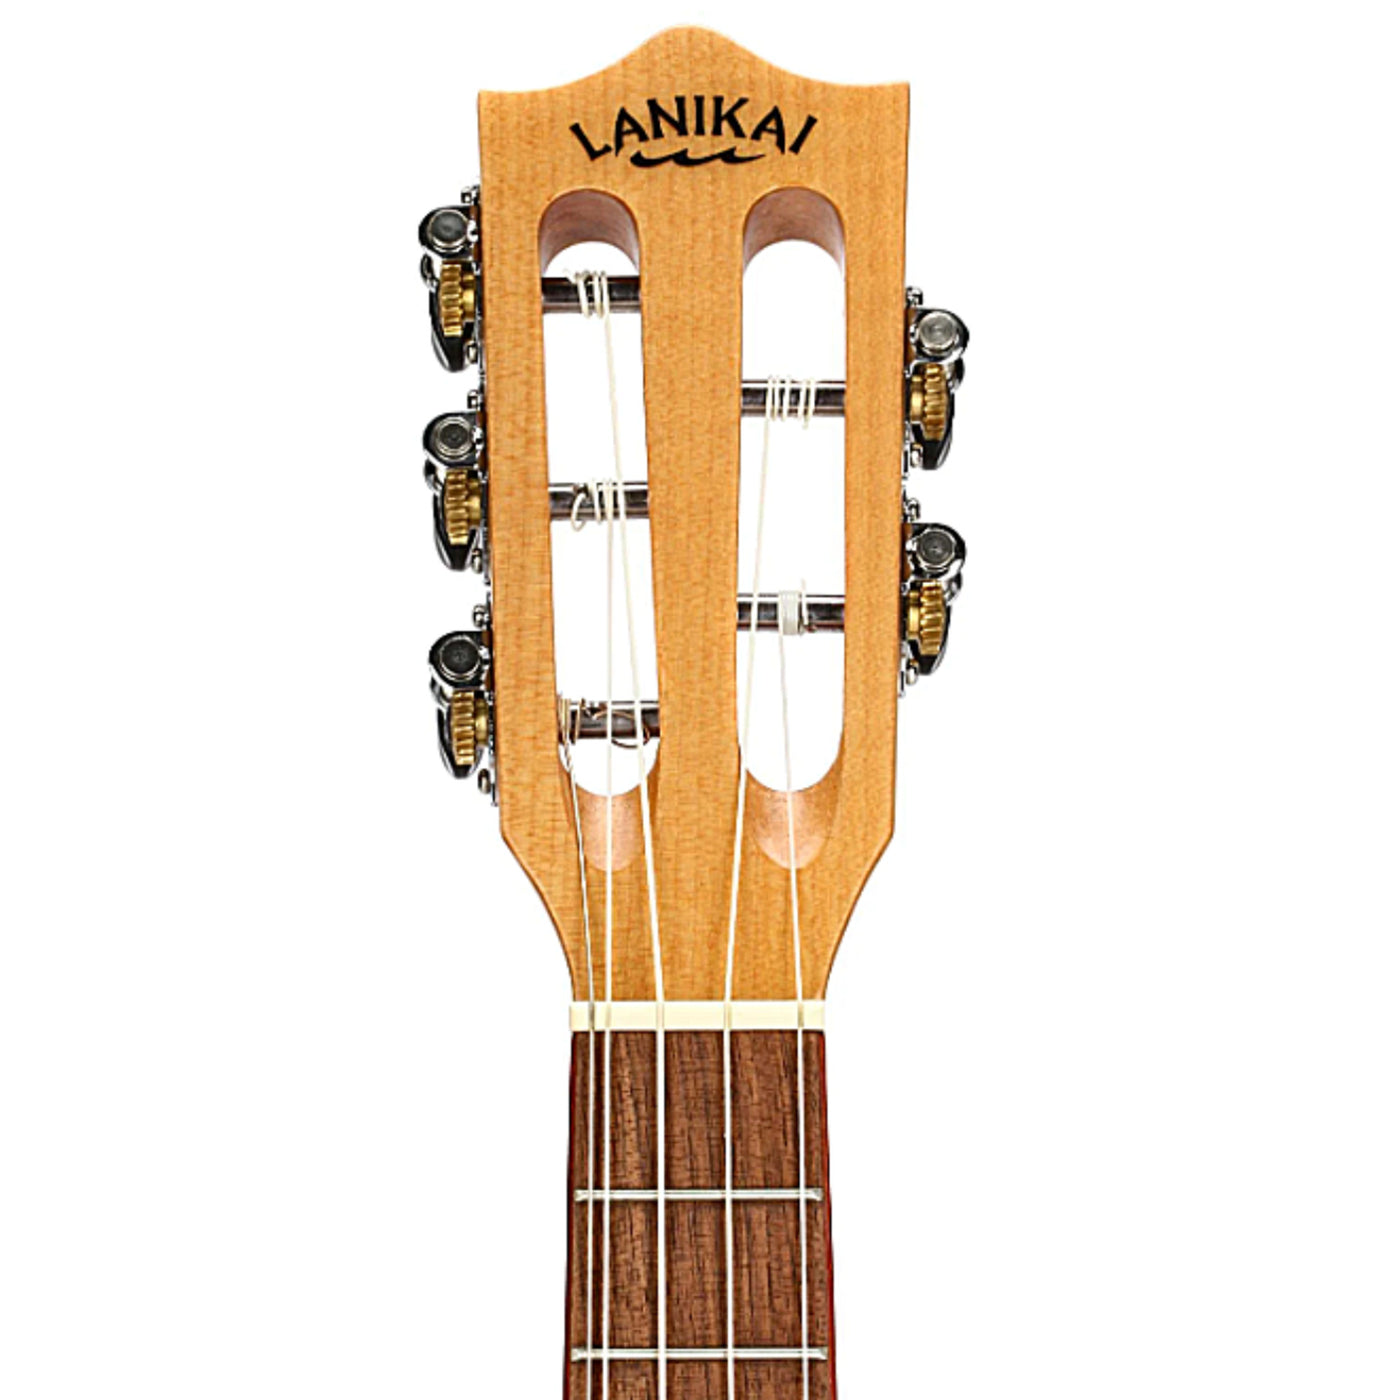 Lanikai FM-5CET 5 String Ukulele, Flame Maple Tenor Cutaway and Electronics, with Fishman Kula Preamp and Tuner